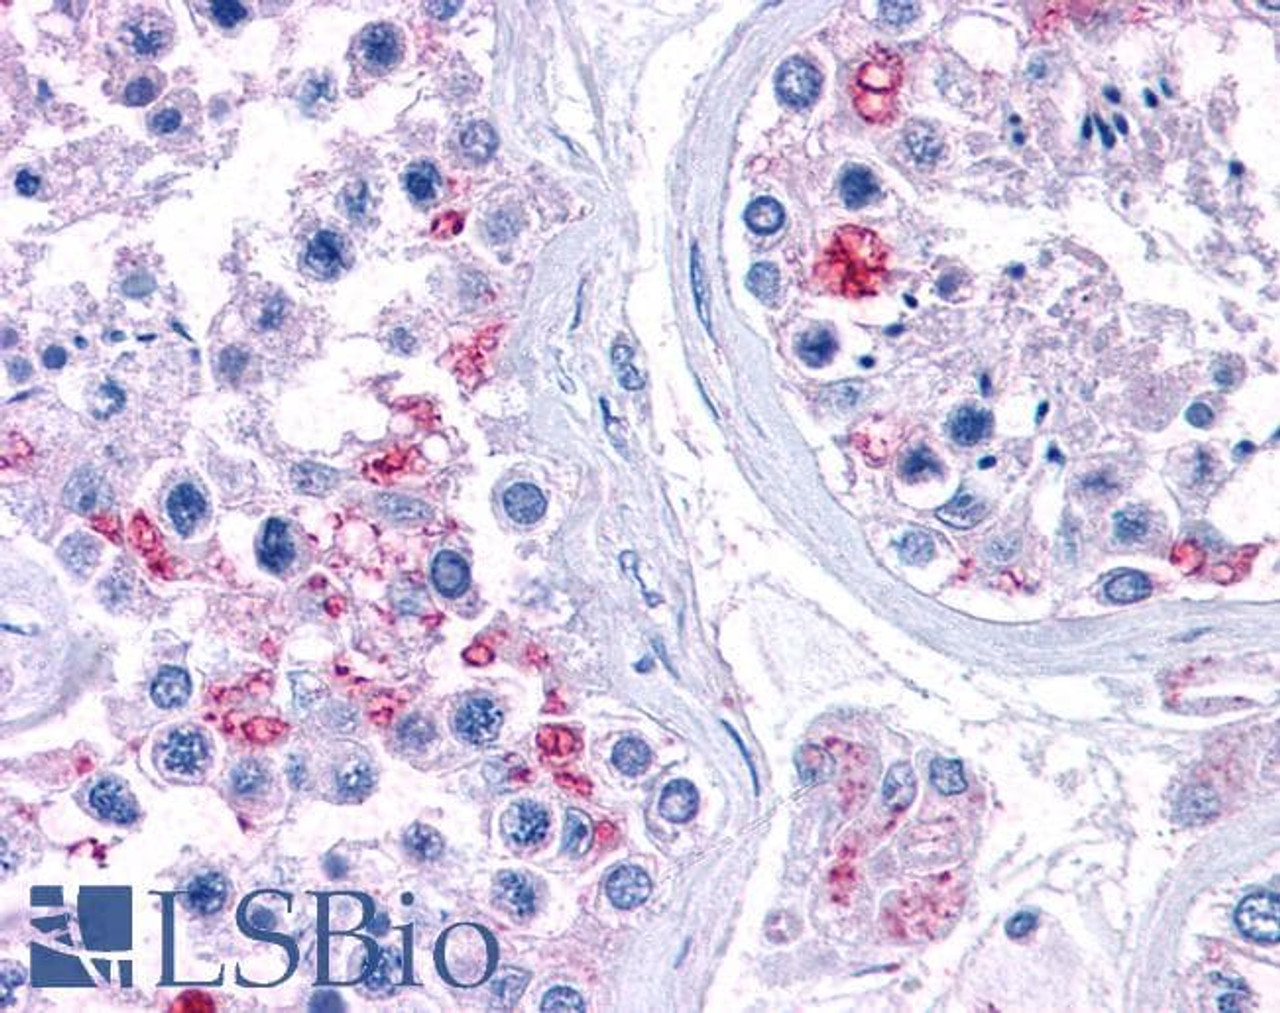 46-296 (3.75ug/ml) staining of paraffin embedded Human Thyroid. Steamed antigen retrieval with citrate buffer pH 6, AP-staining.